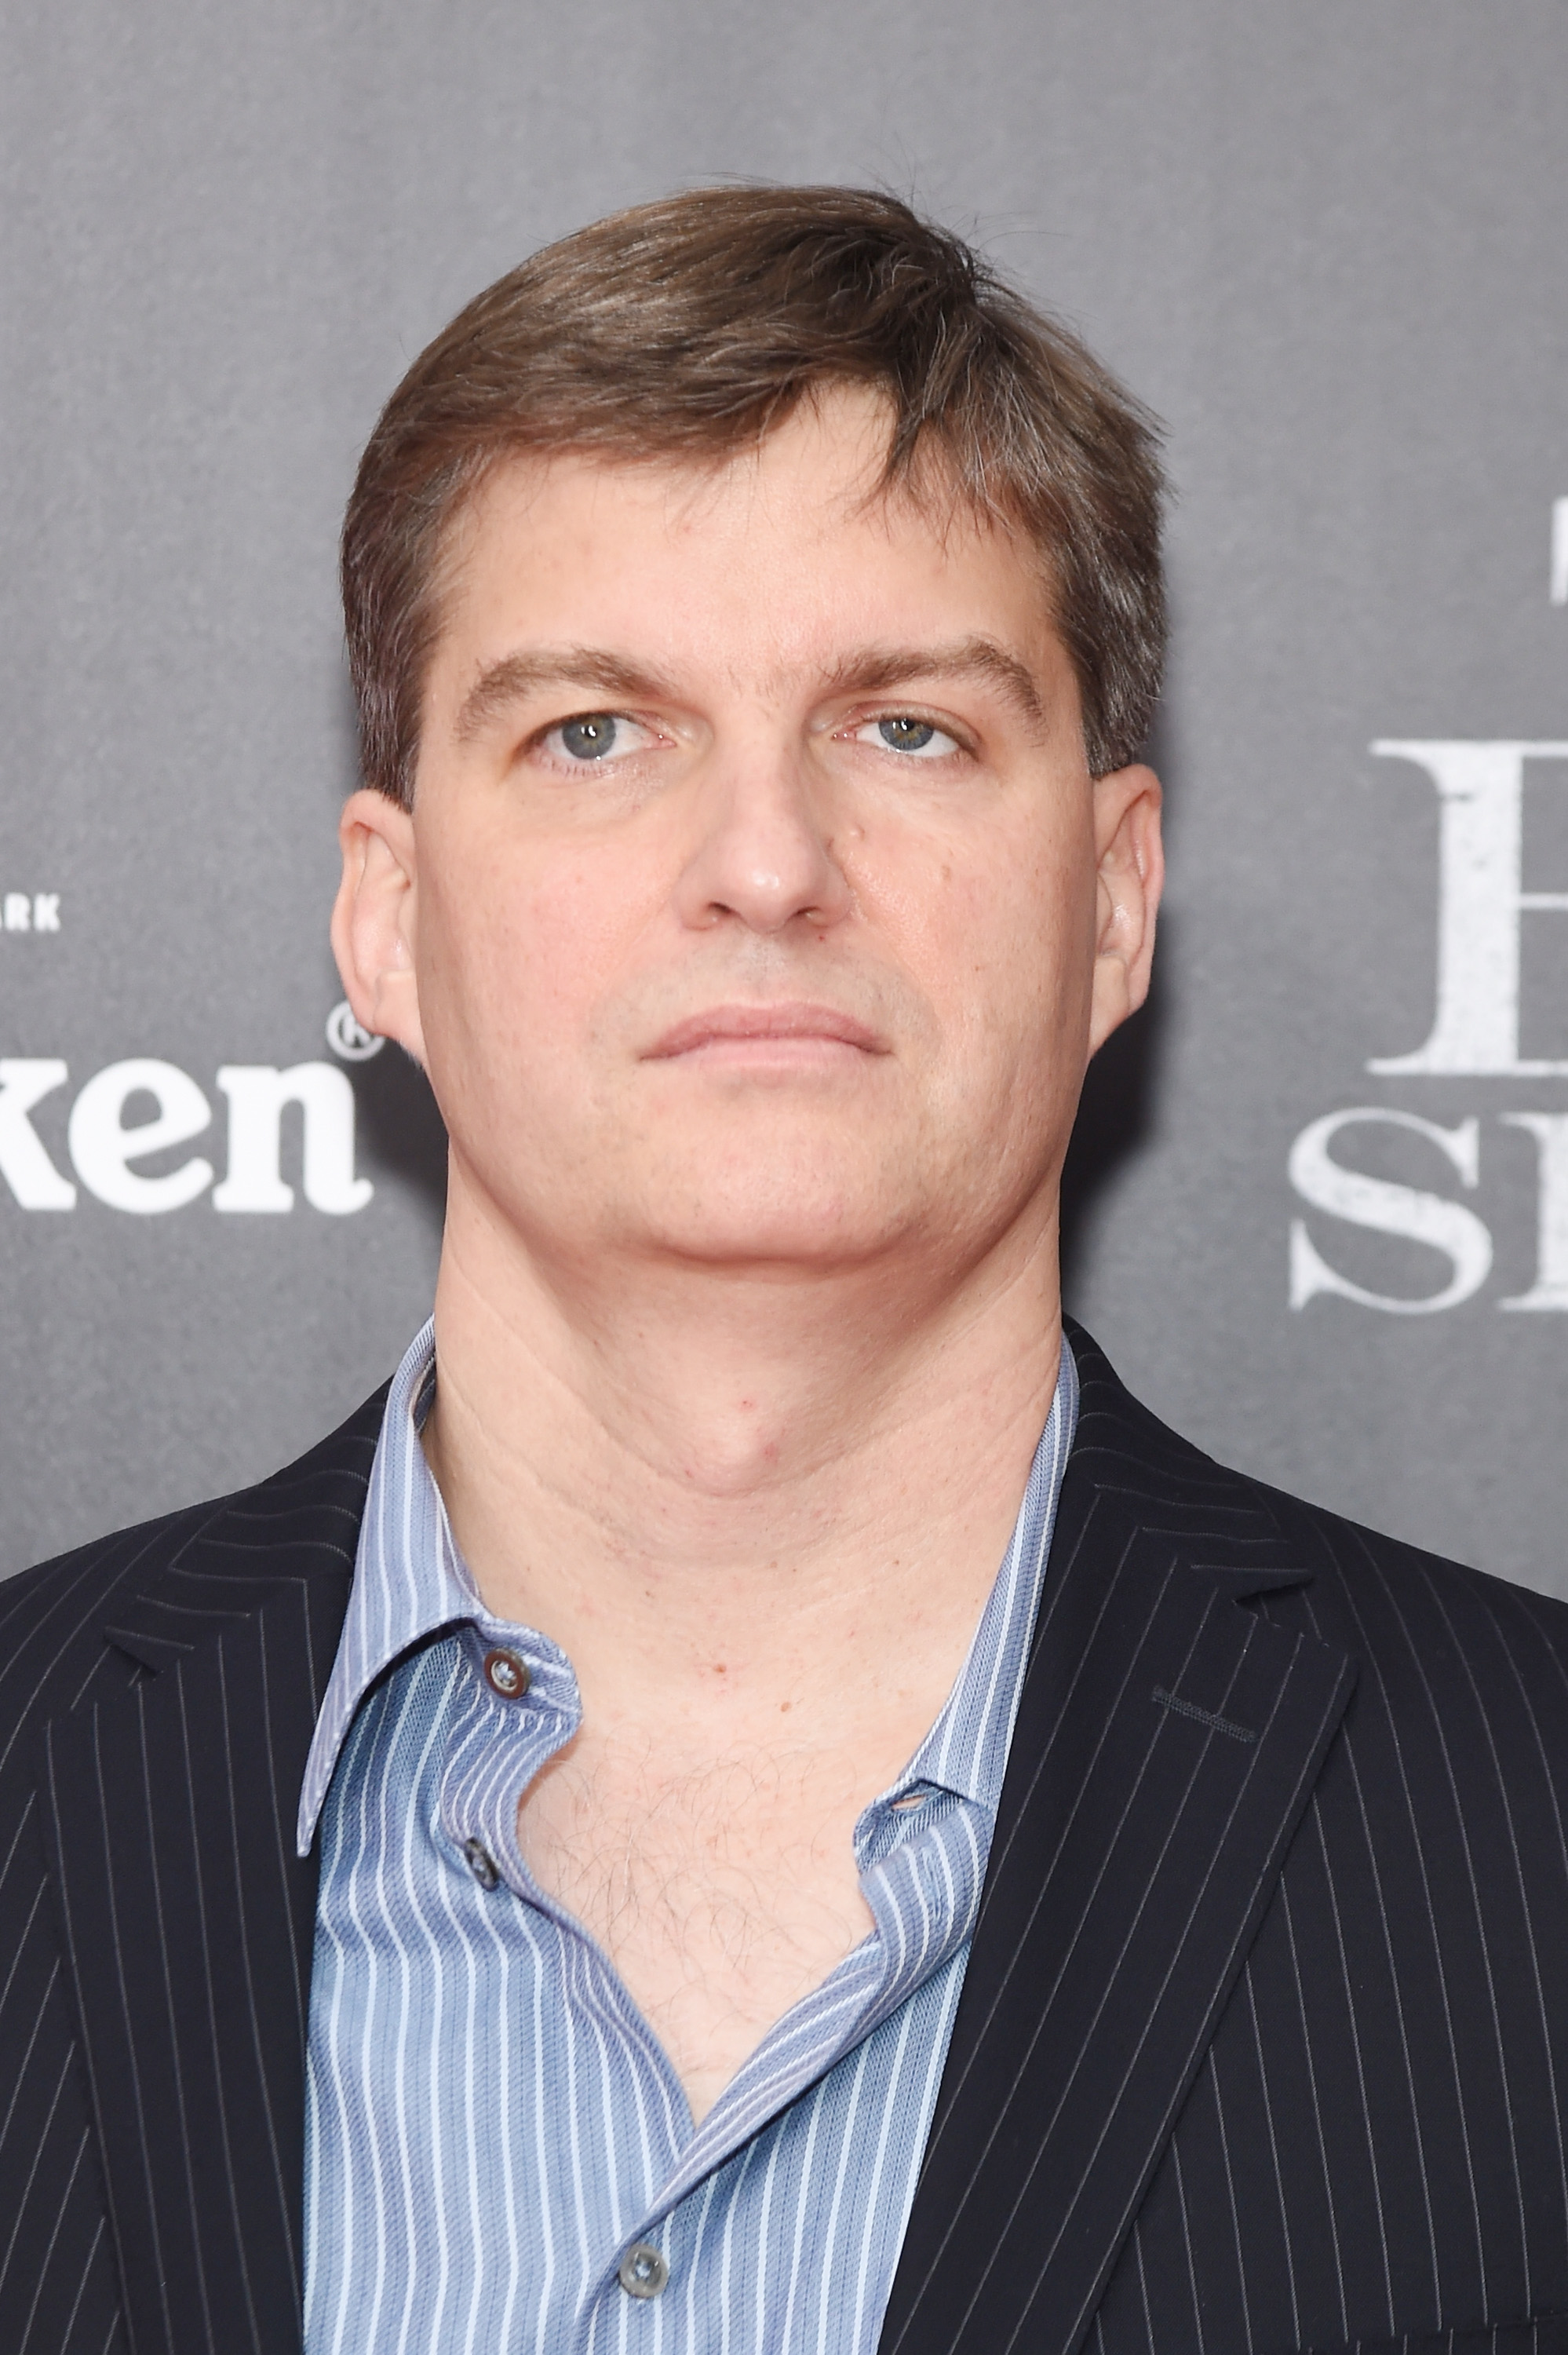 Michael Burry at the premiere of "The Big Short" on November 23, 2015, in New York City. | Source: Getty Images